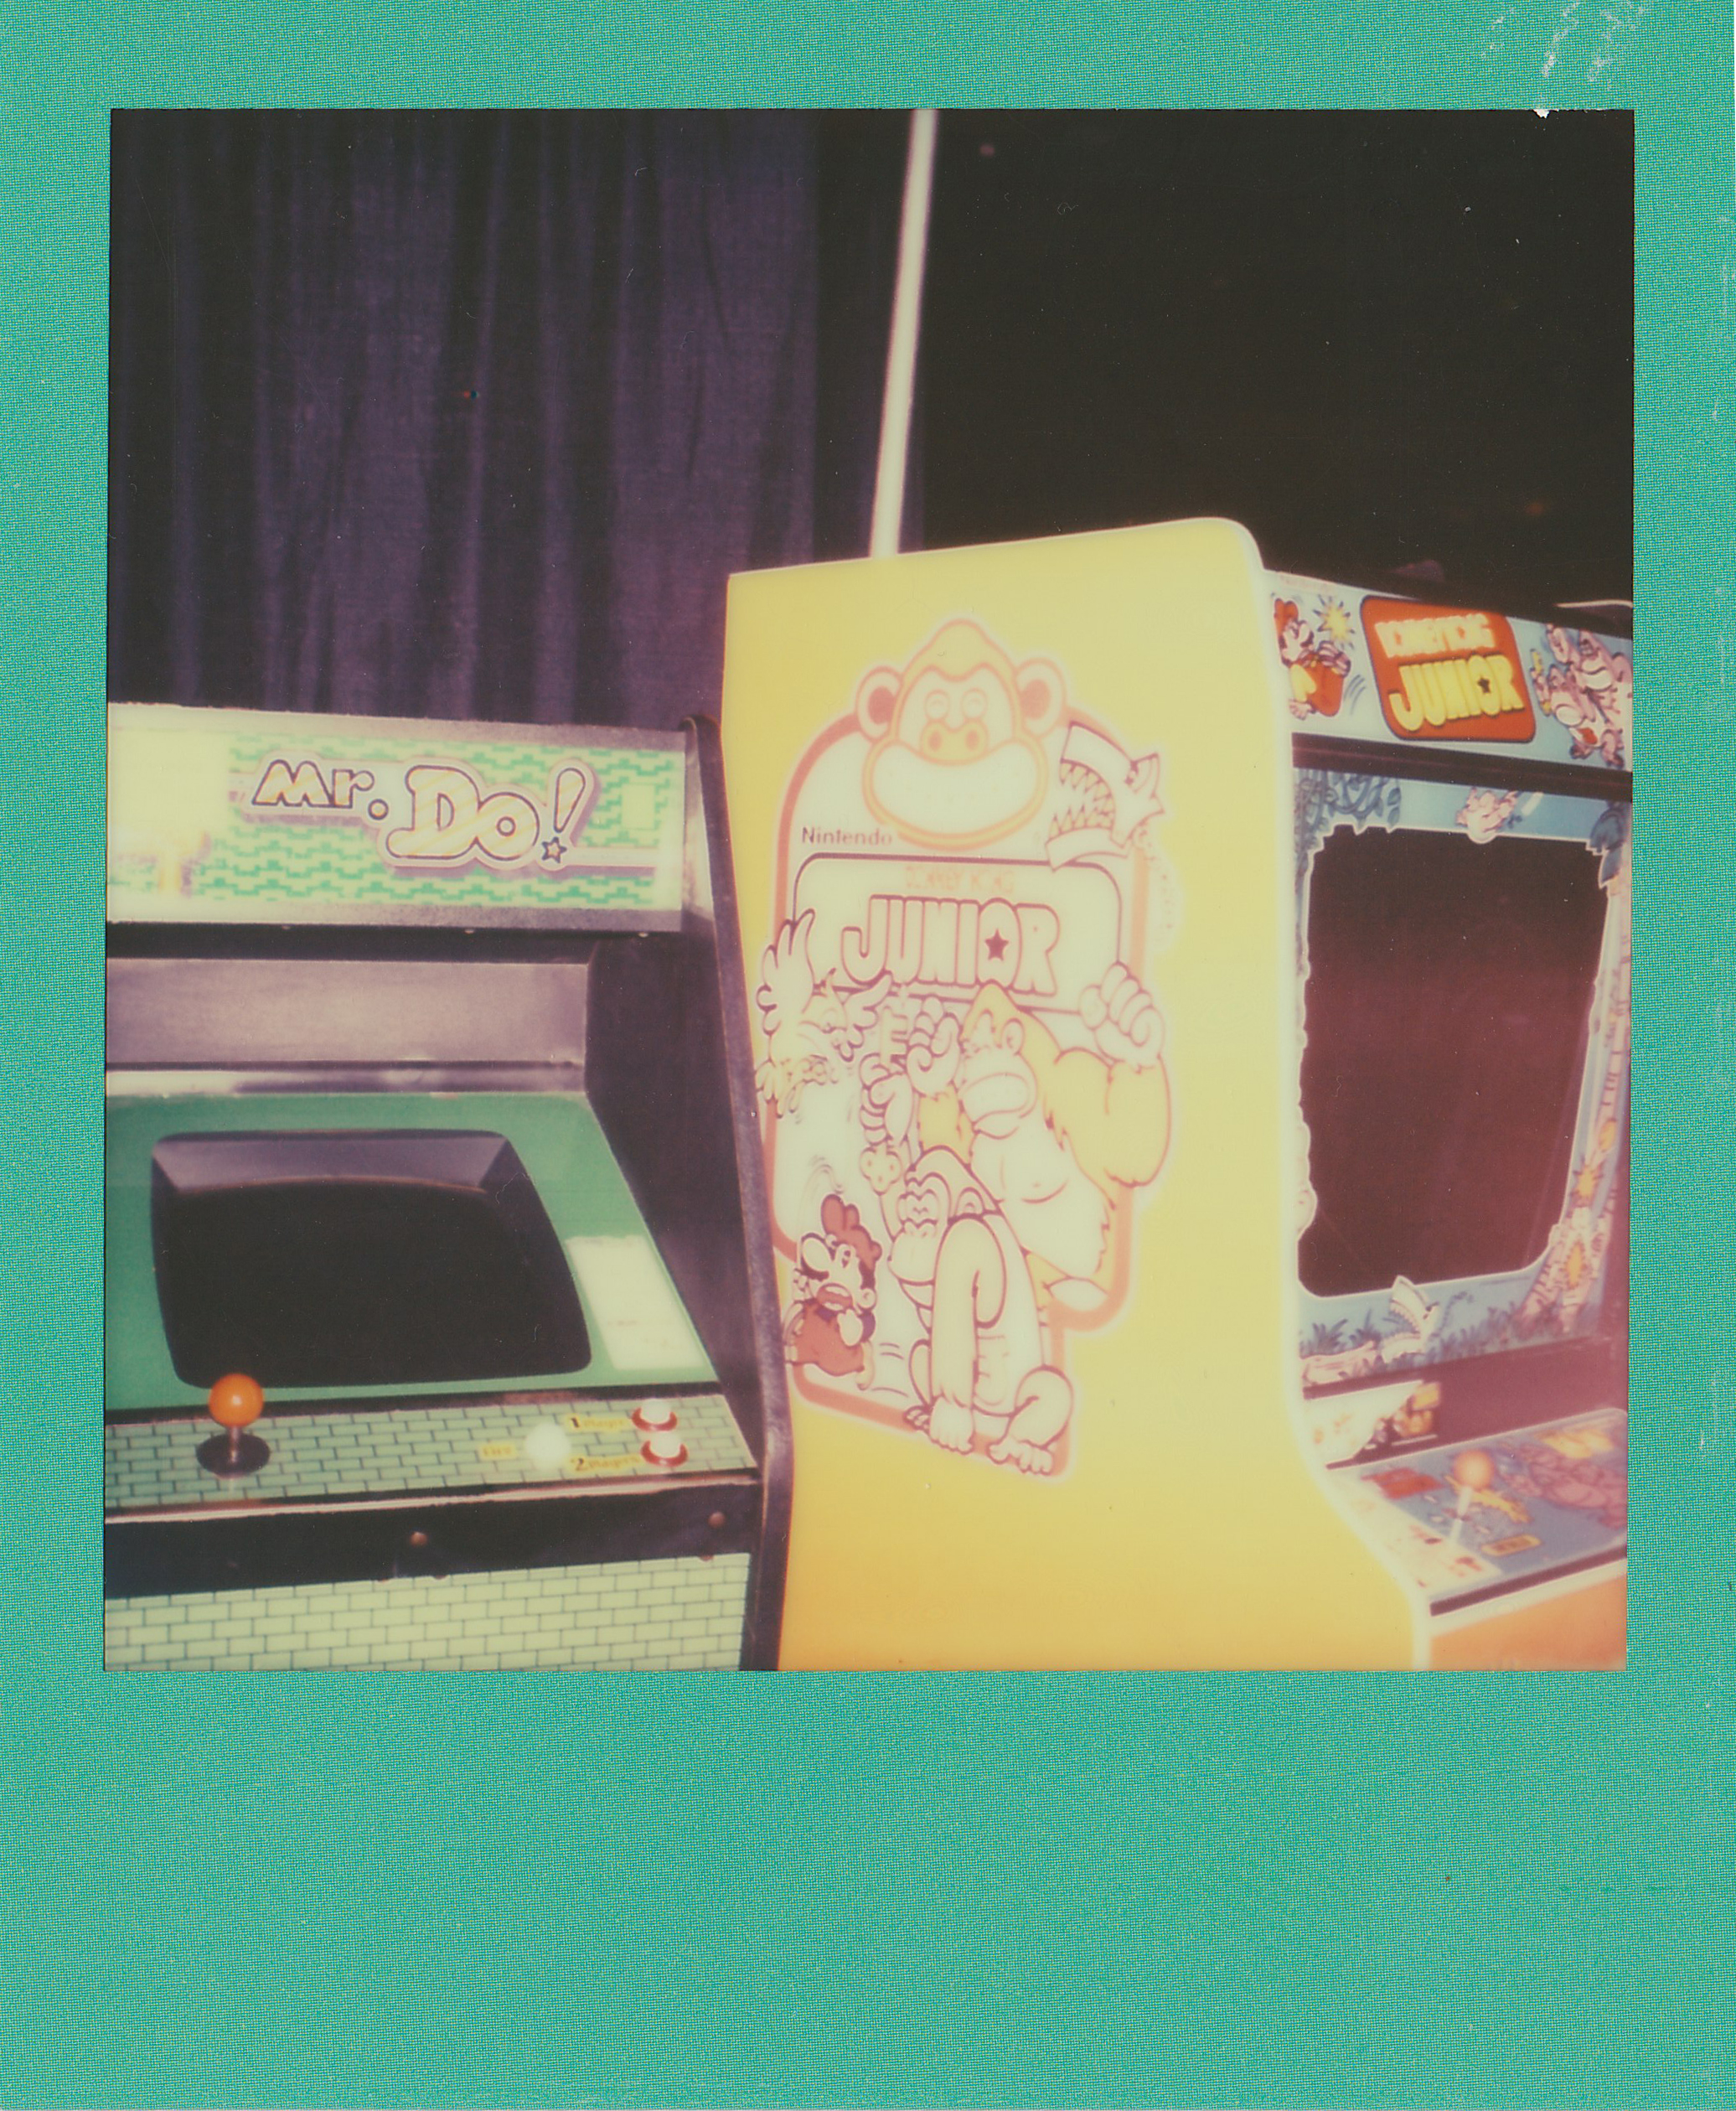 A Mr. Do! and Donkey Kong Junior cabinets at the Texas Pinball Festival 2014.<br>Polaroid SX-70, Impossible Project film.